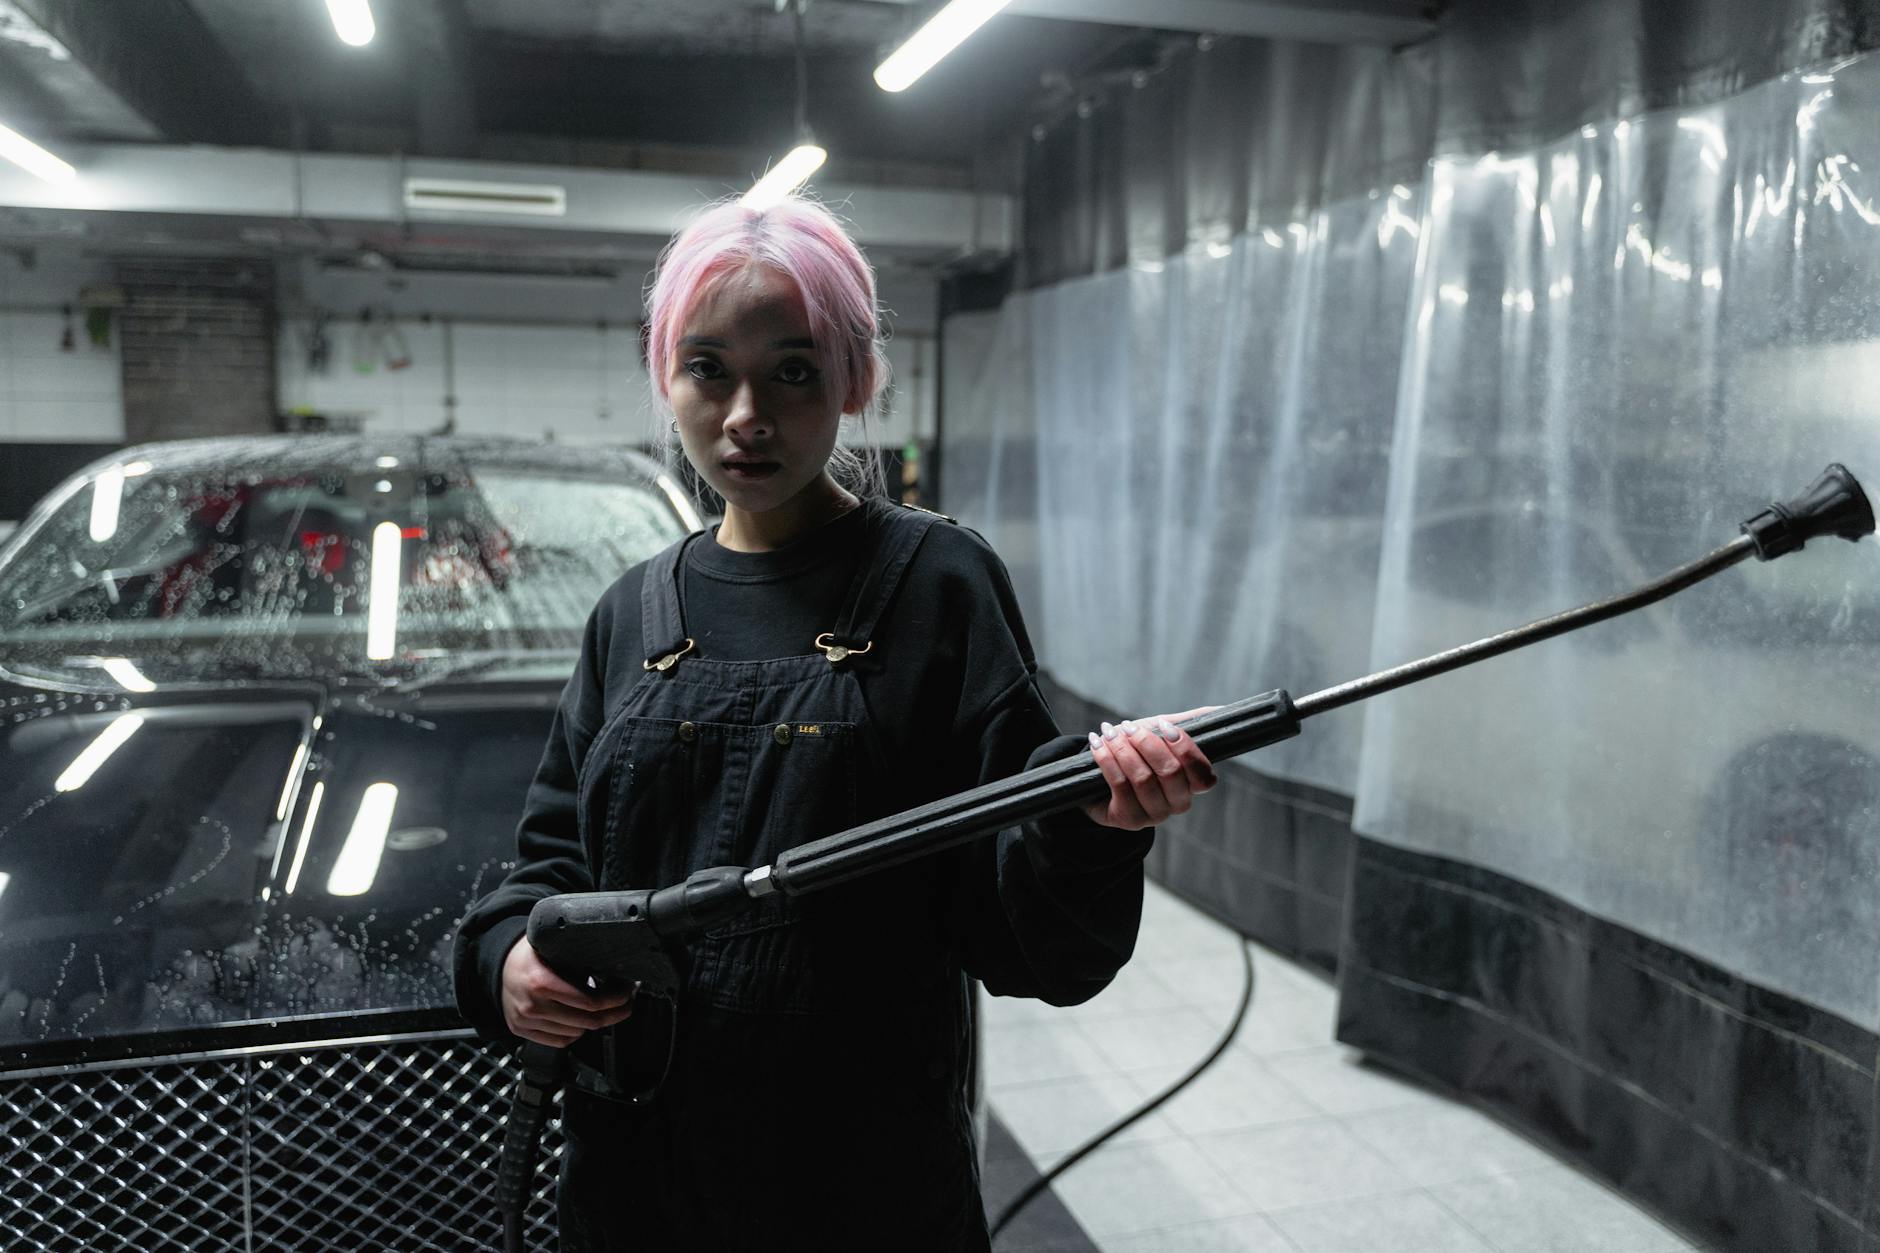 Woman with Pink Hair Looking at the Camera while Holding a Pressure Washer